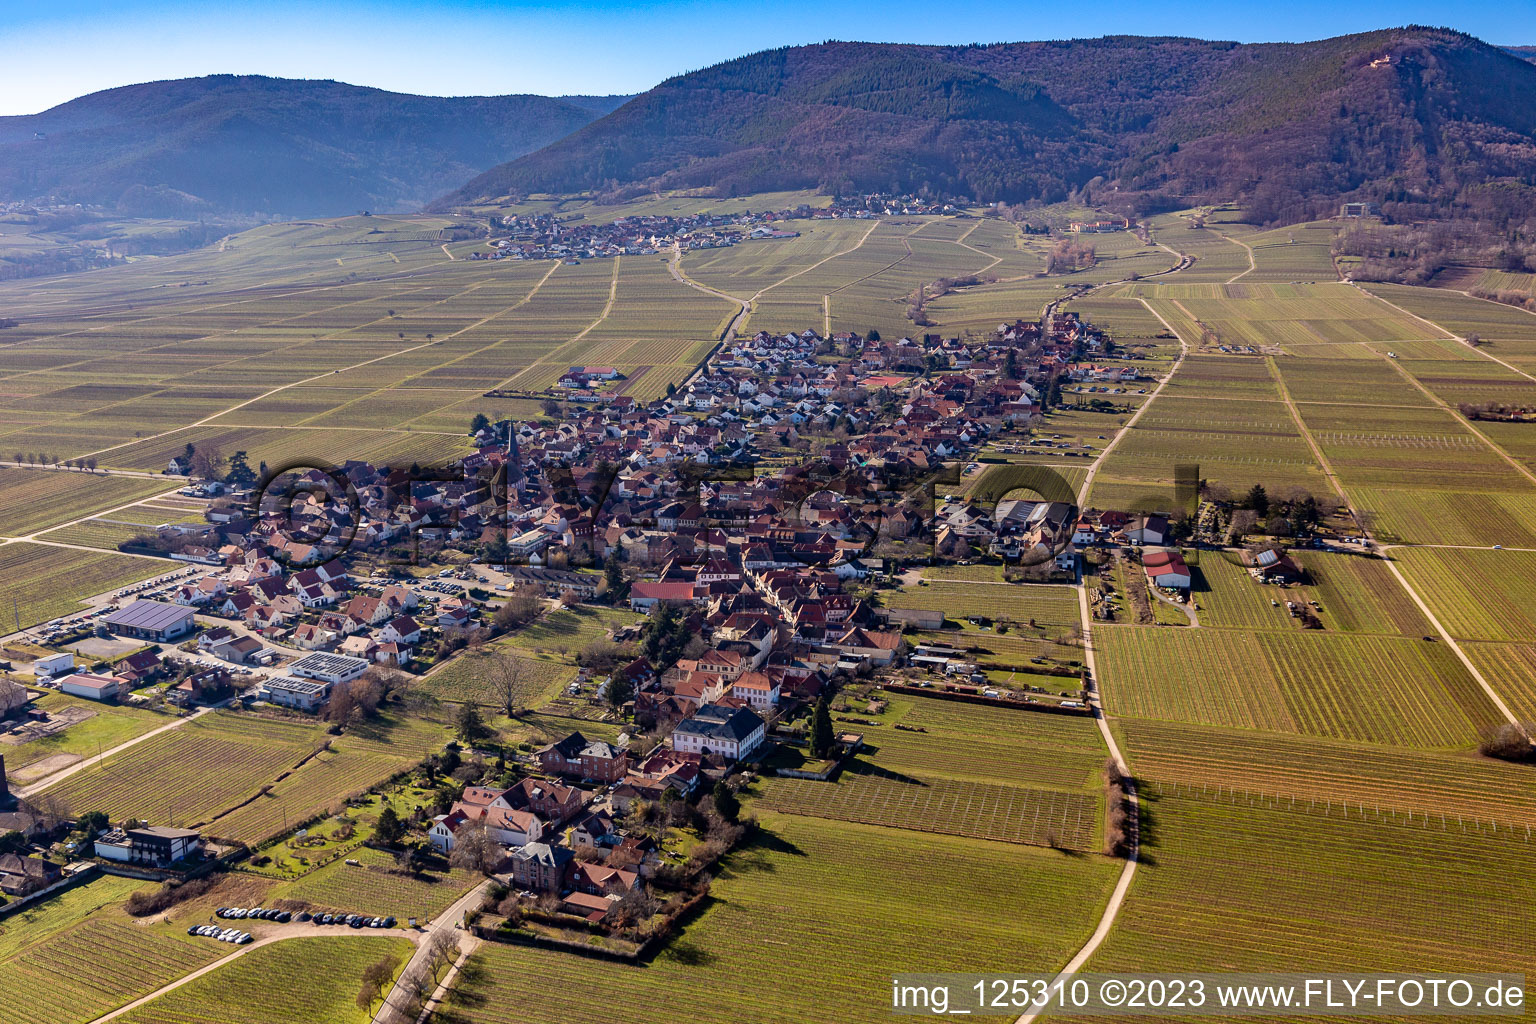 Rhodt unter Rietburg in the state Rhineland-Palatinate, Germany from the drone perspective